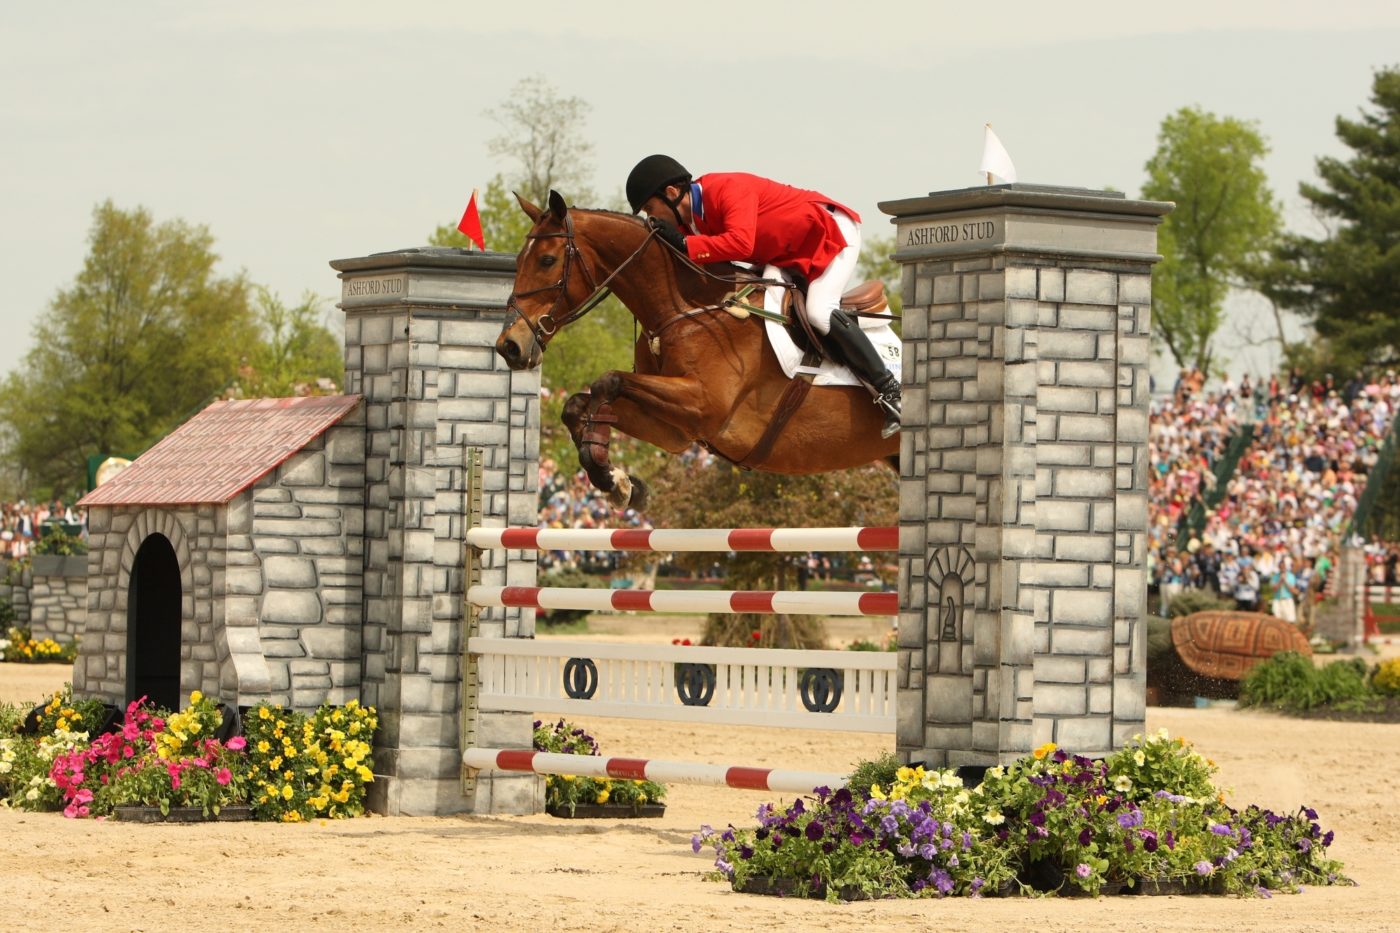 The 2023 LRK3DE Daily Show Jumping